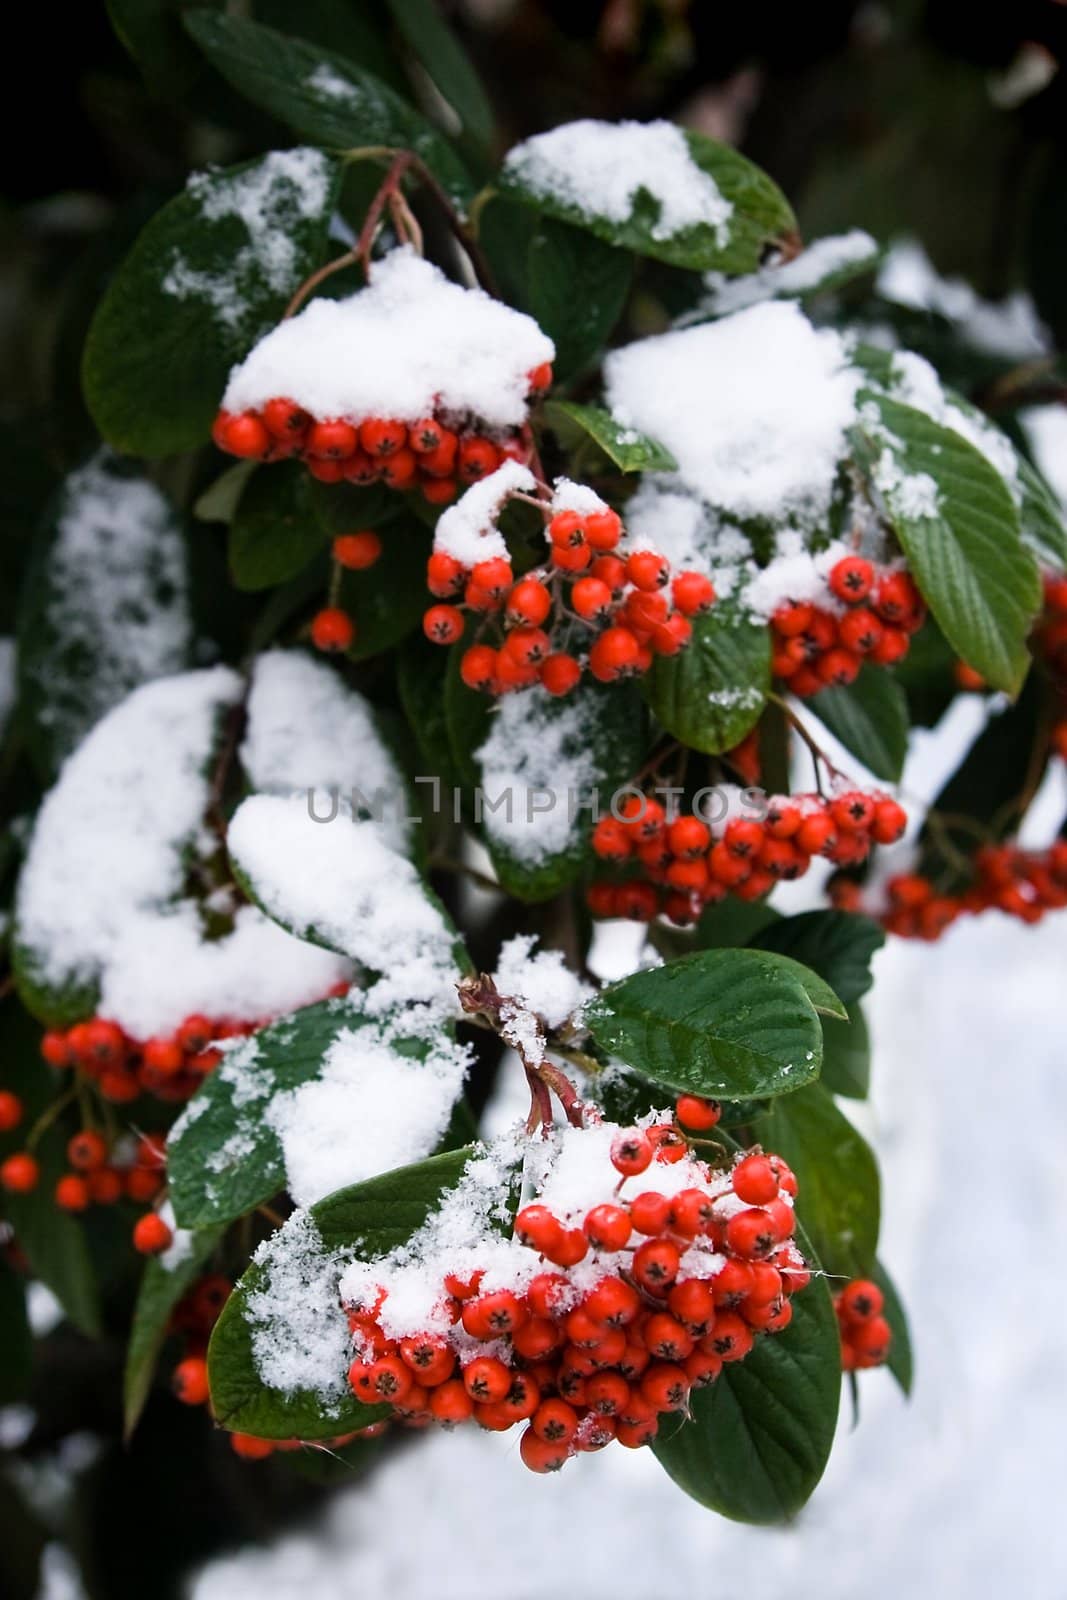 Red berries in winter with snowcap - vertical image